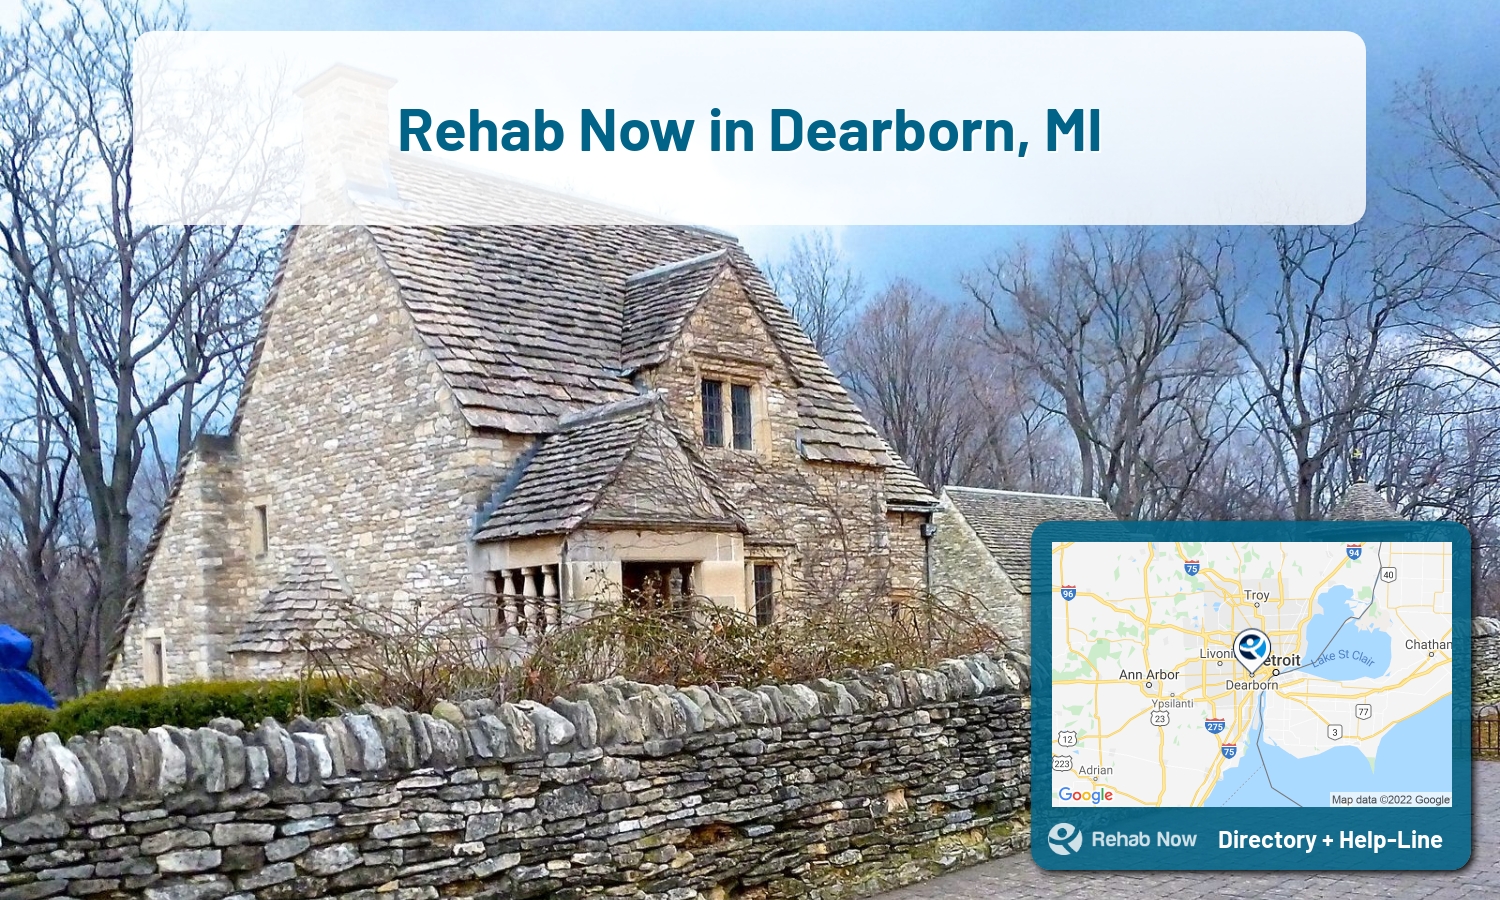 Need treatment nearby in Dearborn, Michigan? Choose a drug/alcohol rehab center from our list, or call our hotline now for free help.